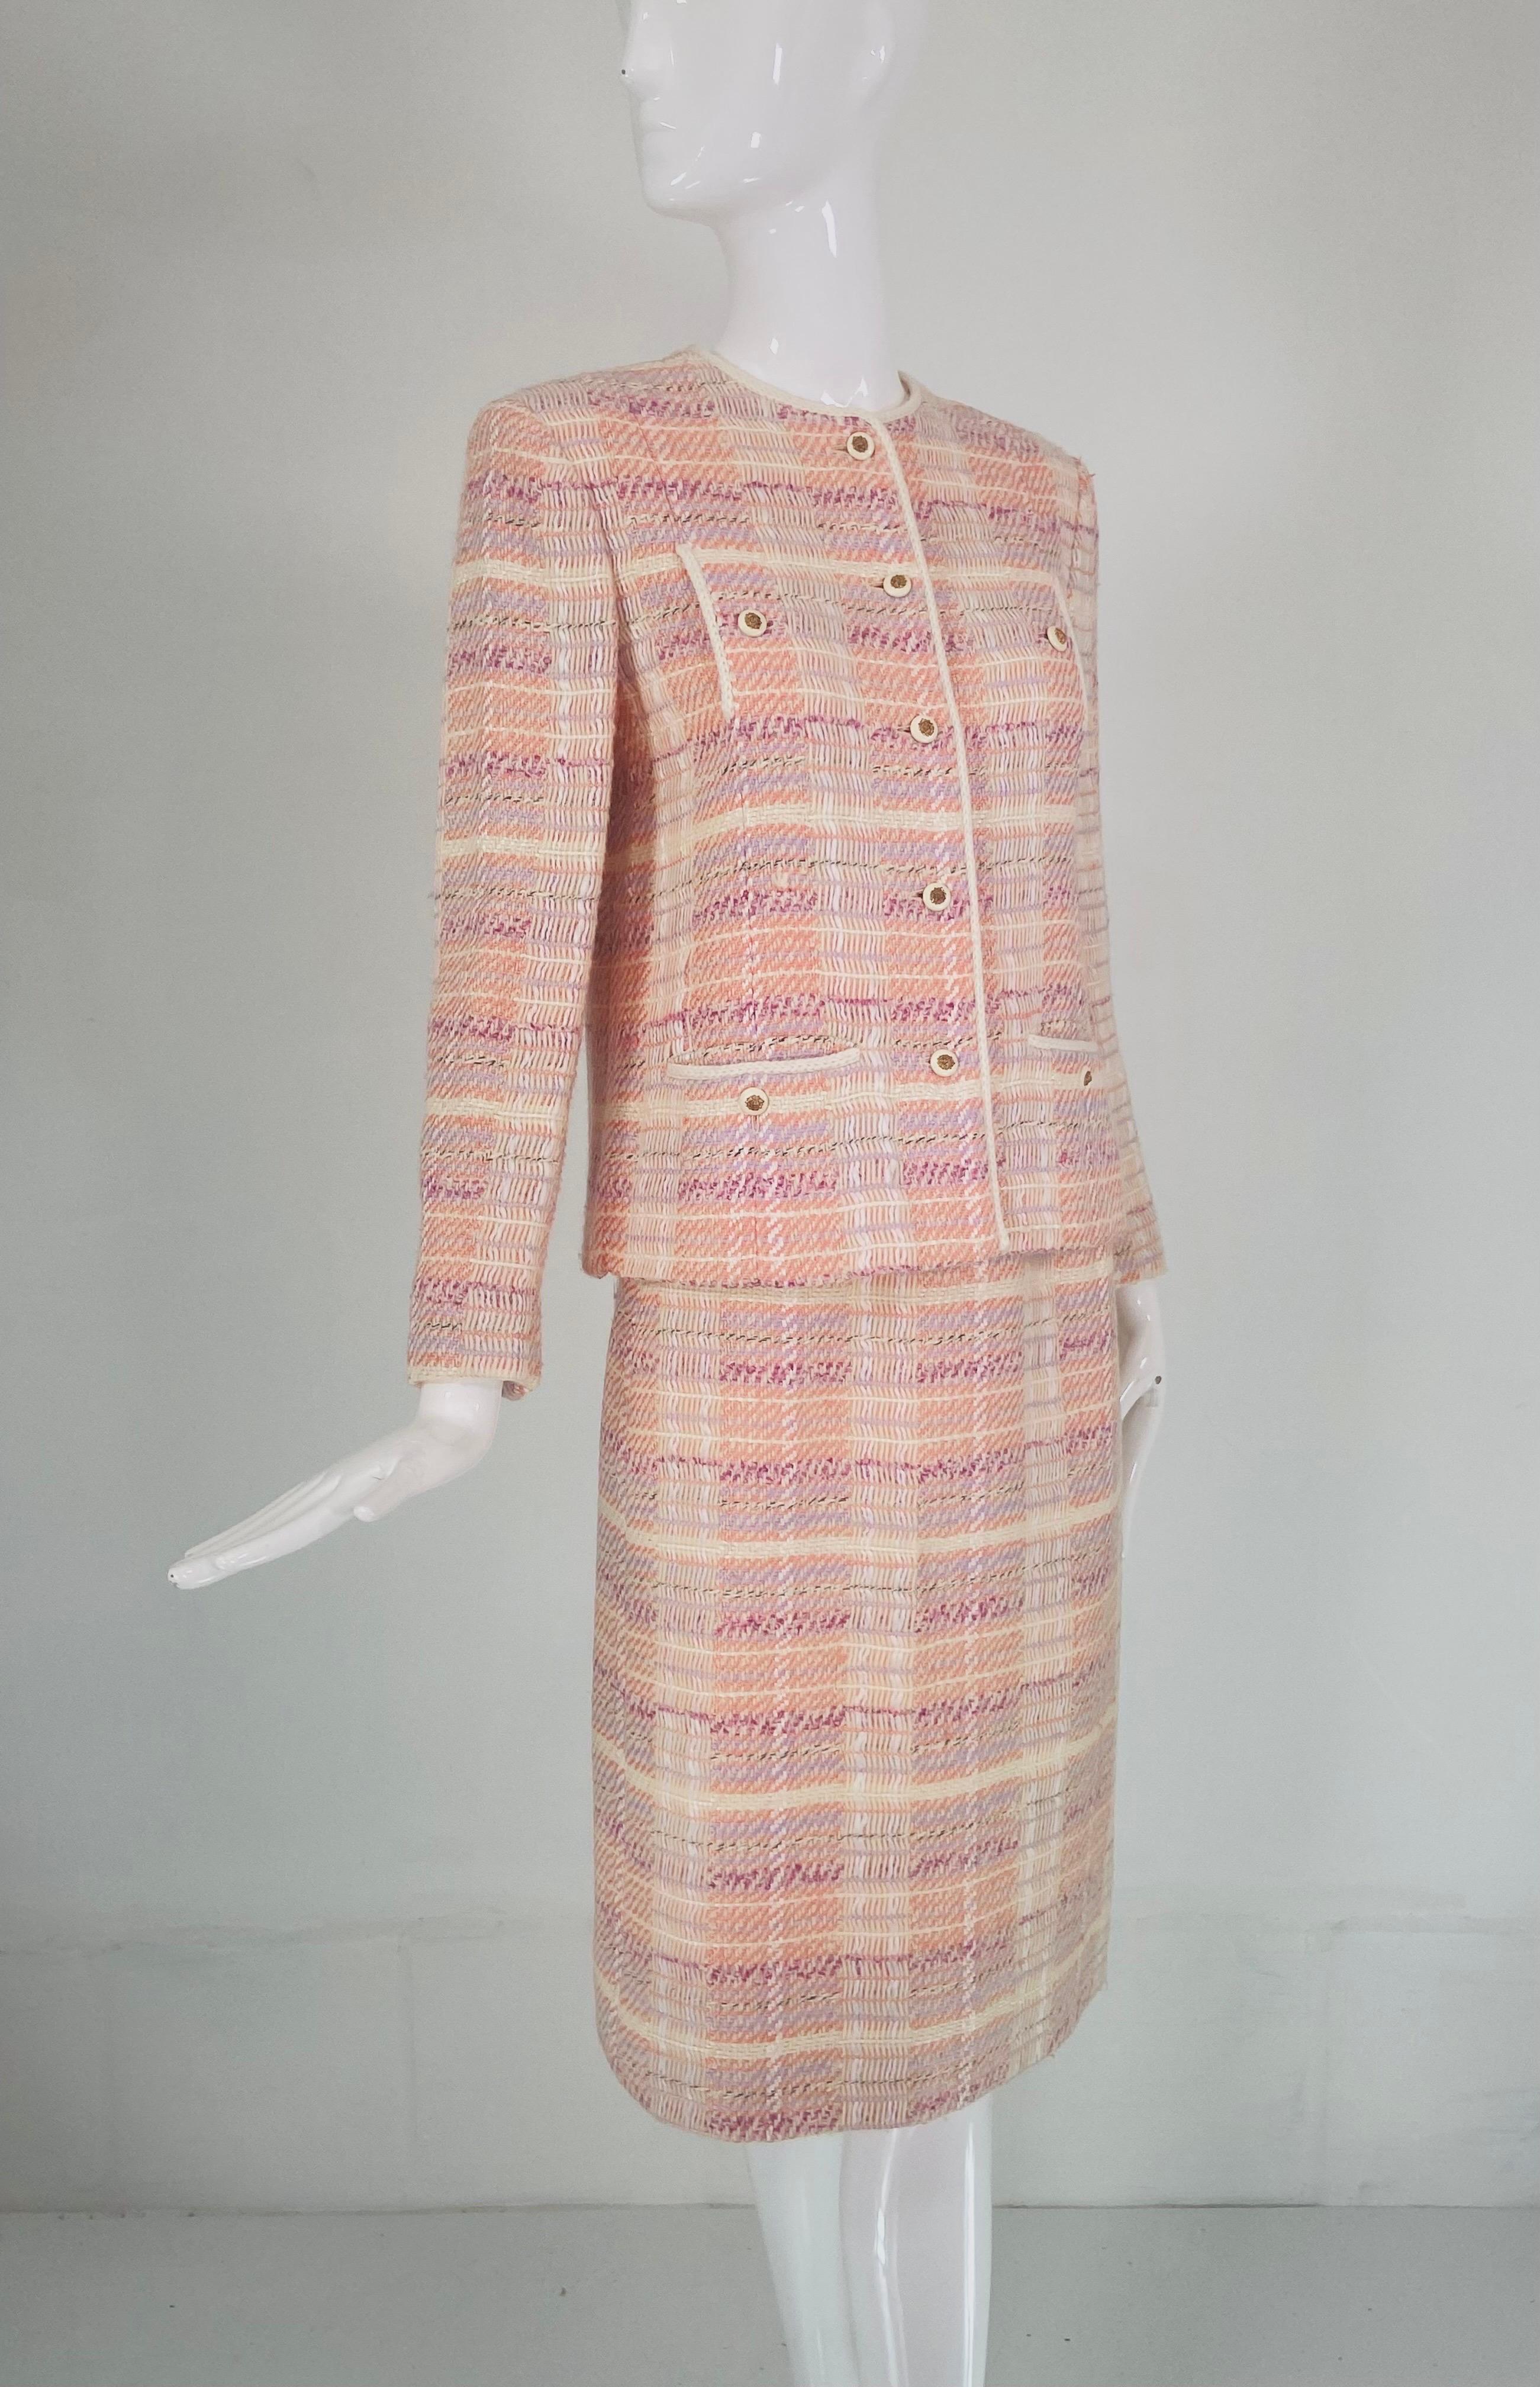 Chanel Creations colourful pastel, peach, cream, lavender, tweed skirt suit from the 1970s, when Chanel was still designing. Chanel Creations was the pret a porter label that was used until the Chanel Boutique label was introduced when Karl